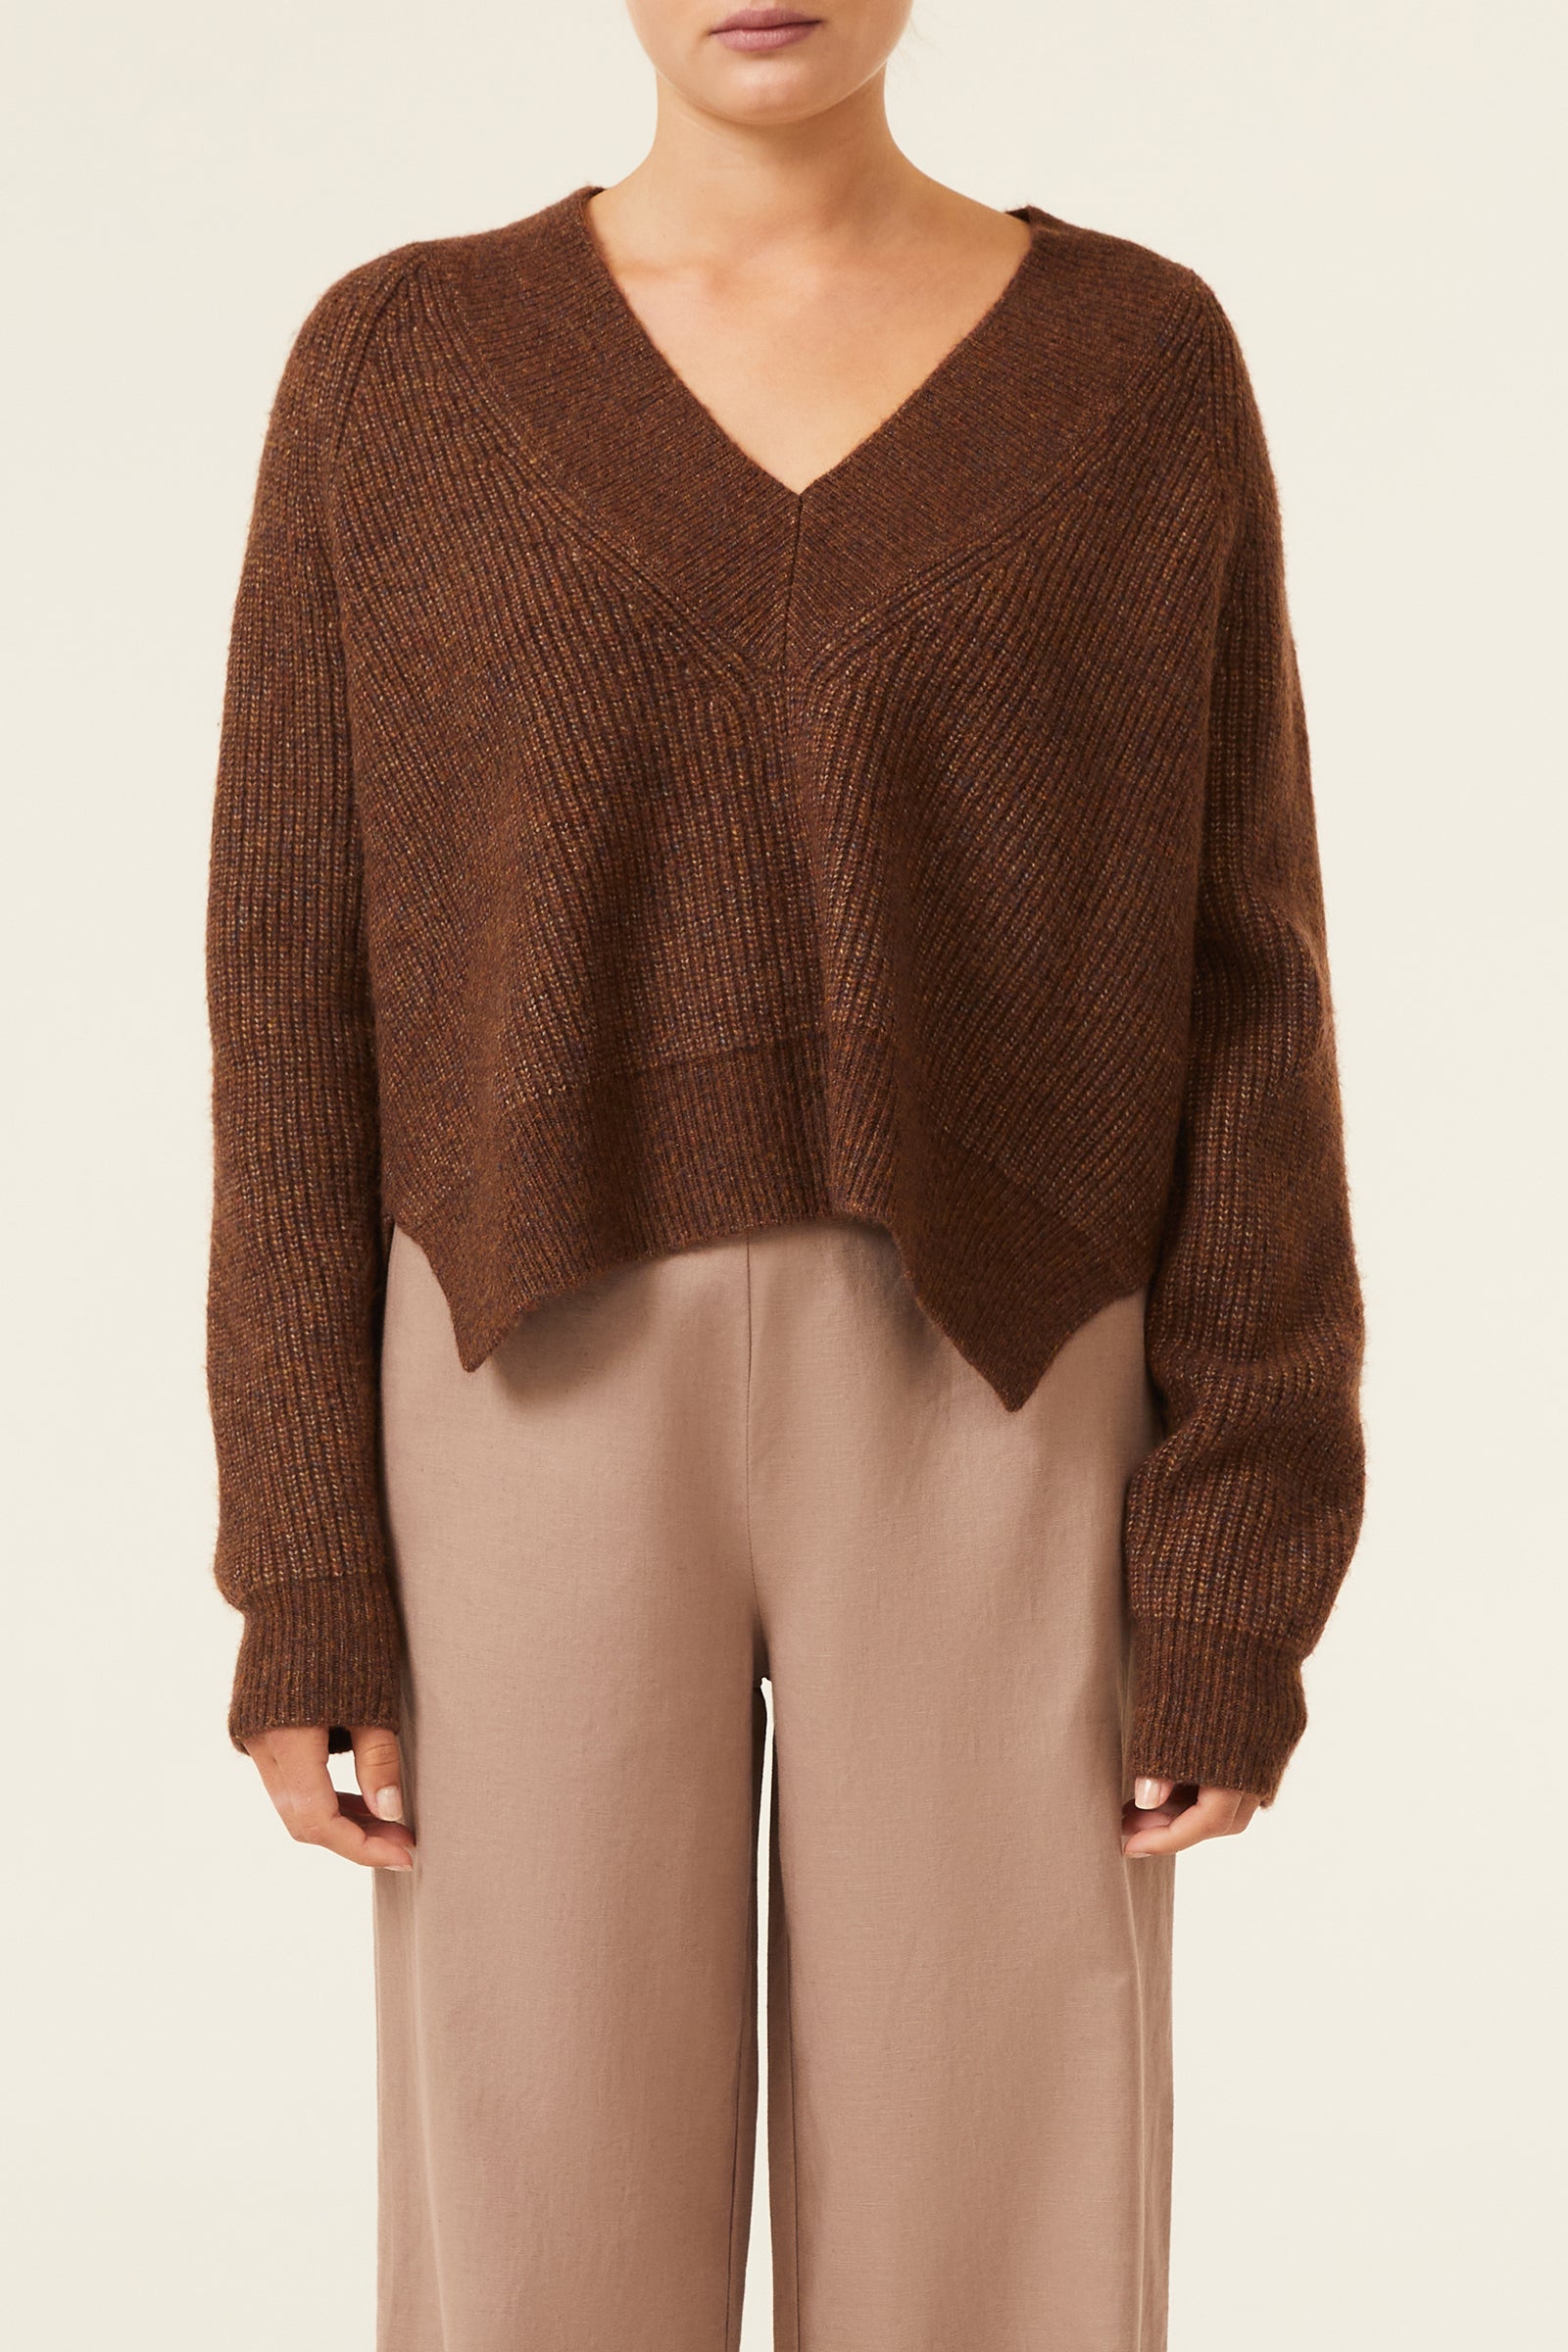 Nude Lucy Mckenzie Knit in a Brown Carob Colour